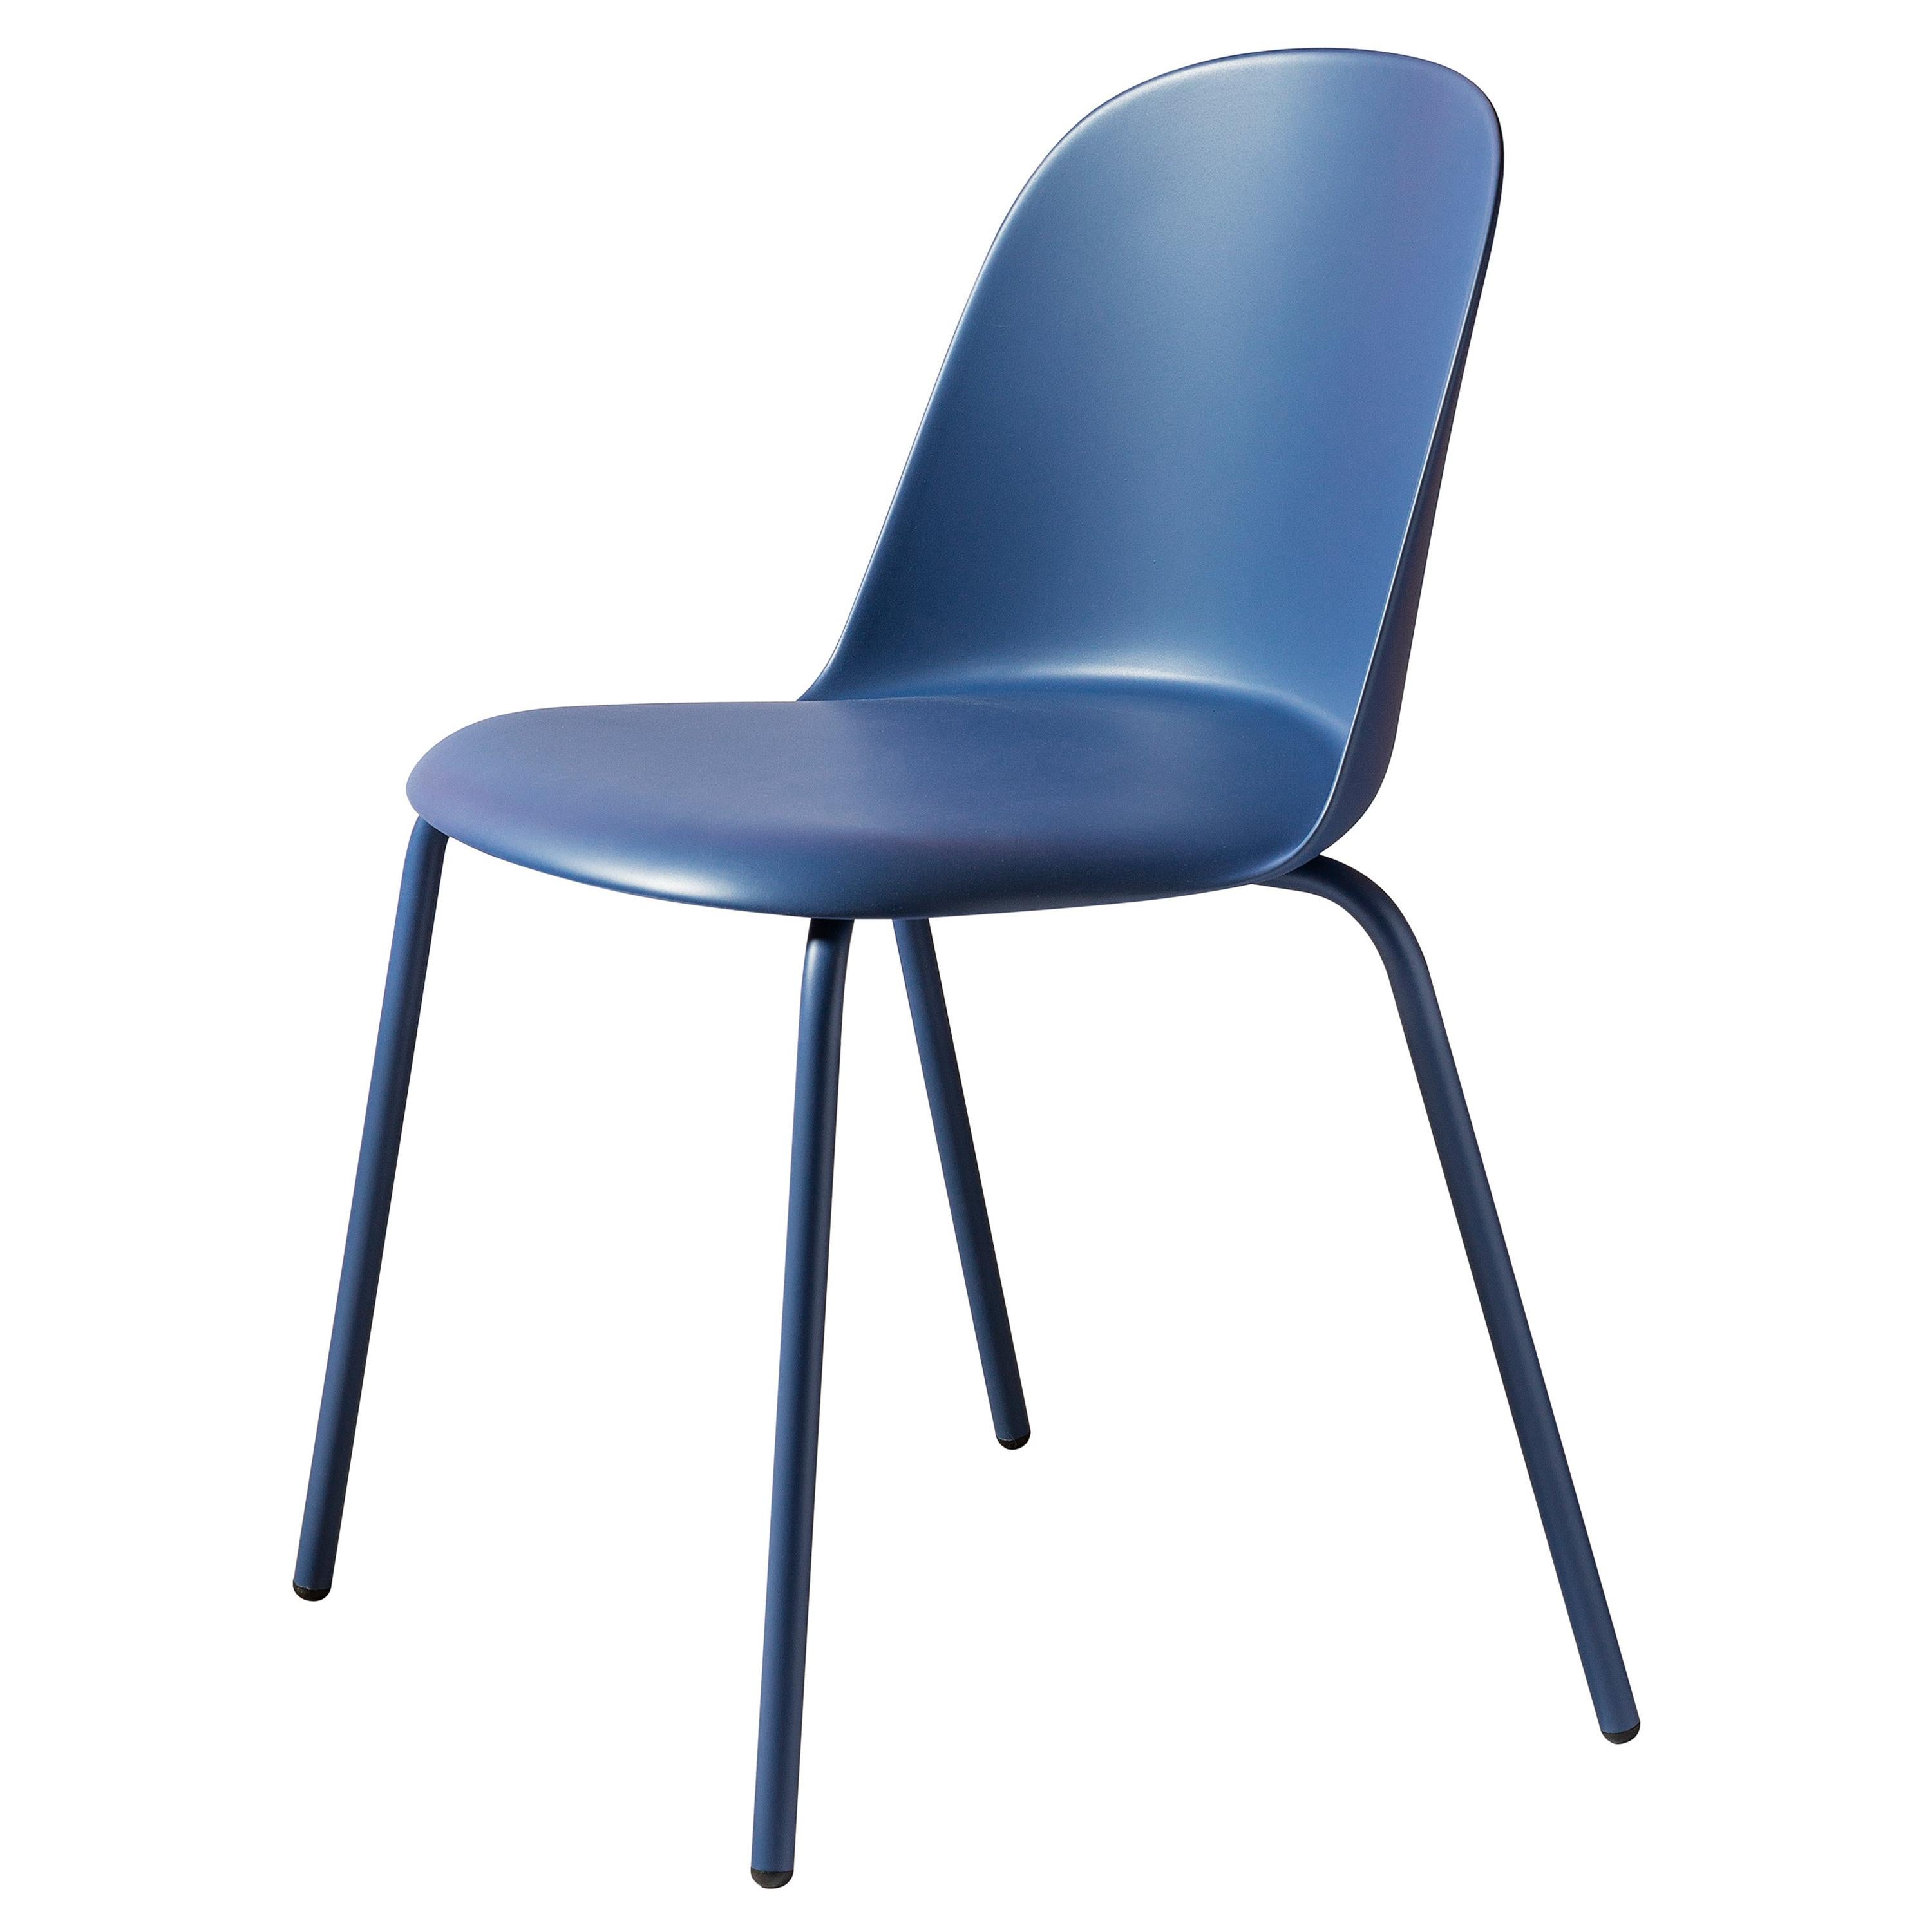 For Sale: Blue (Polypropylene Intense Blue) Mariolina Chair in Matching Iron Legs and Polypropylene Seat, by E-GGs